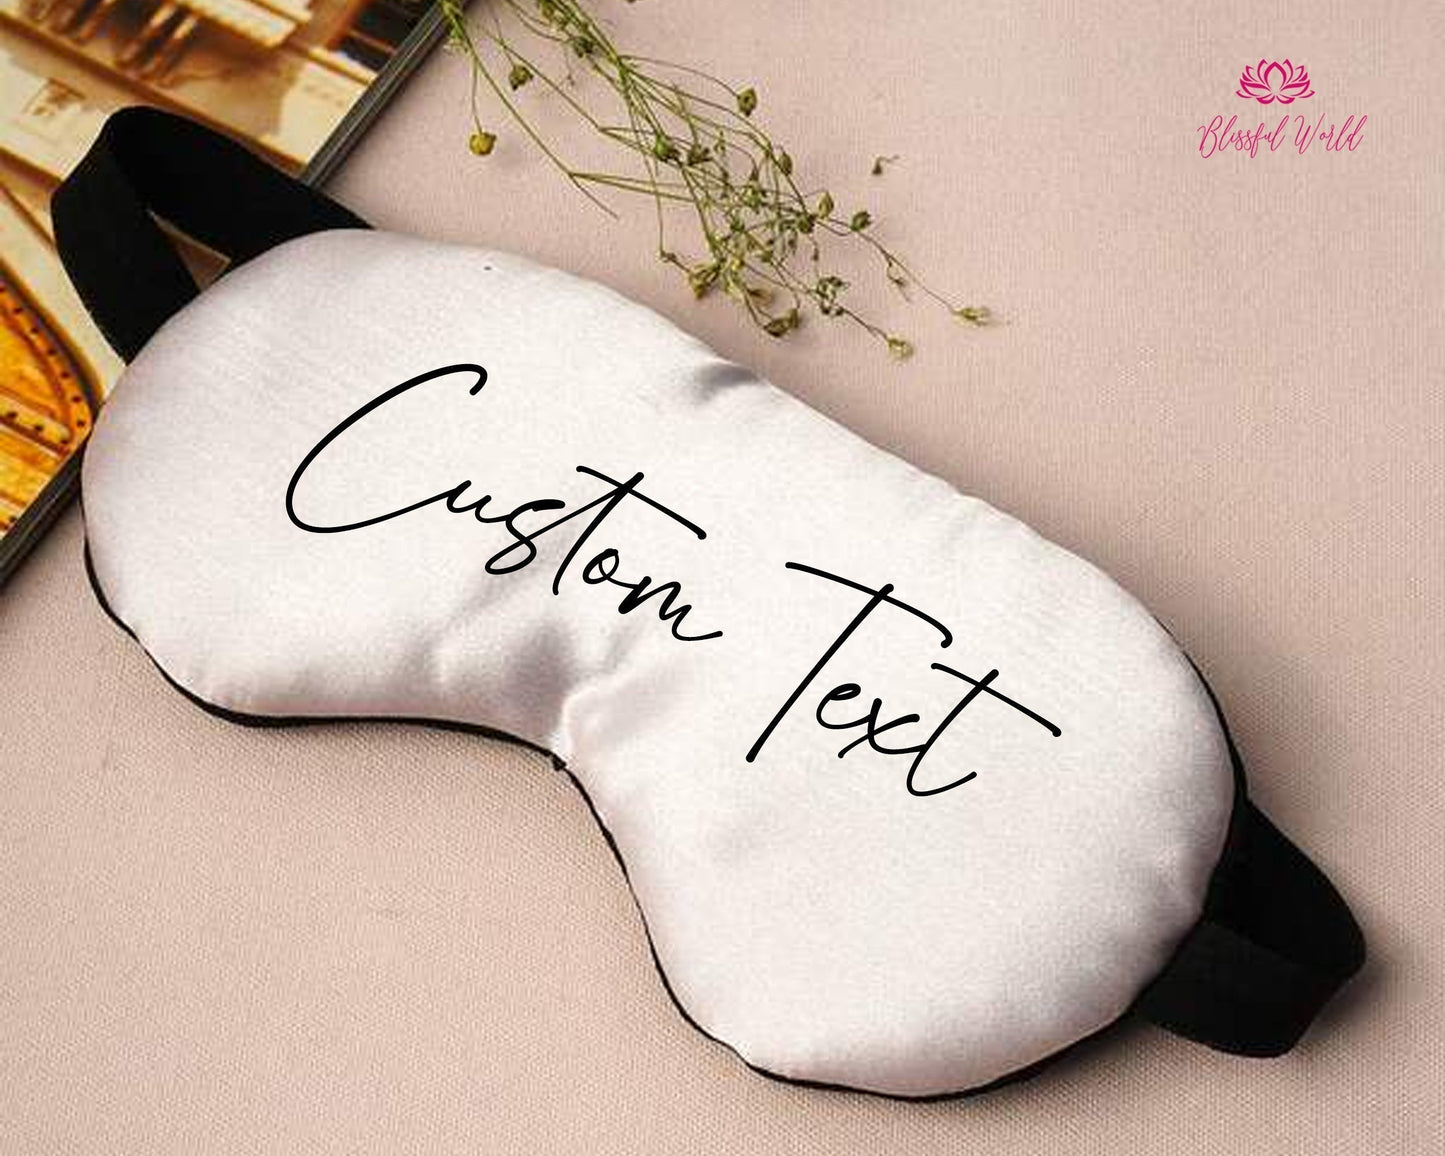 Bachelorette Party gifts, Personalized Sleep Eye Masks, Bridesmaid Gifts, Bachelorette Party Custom Sleep Mask Custom Text Party Mask Sleep Mask